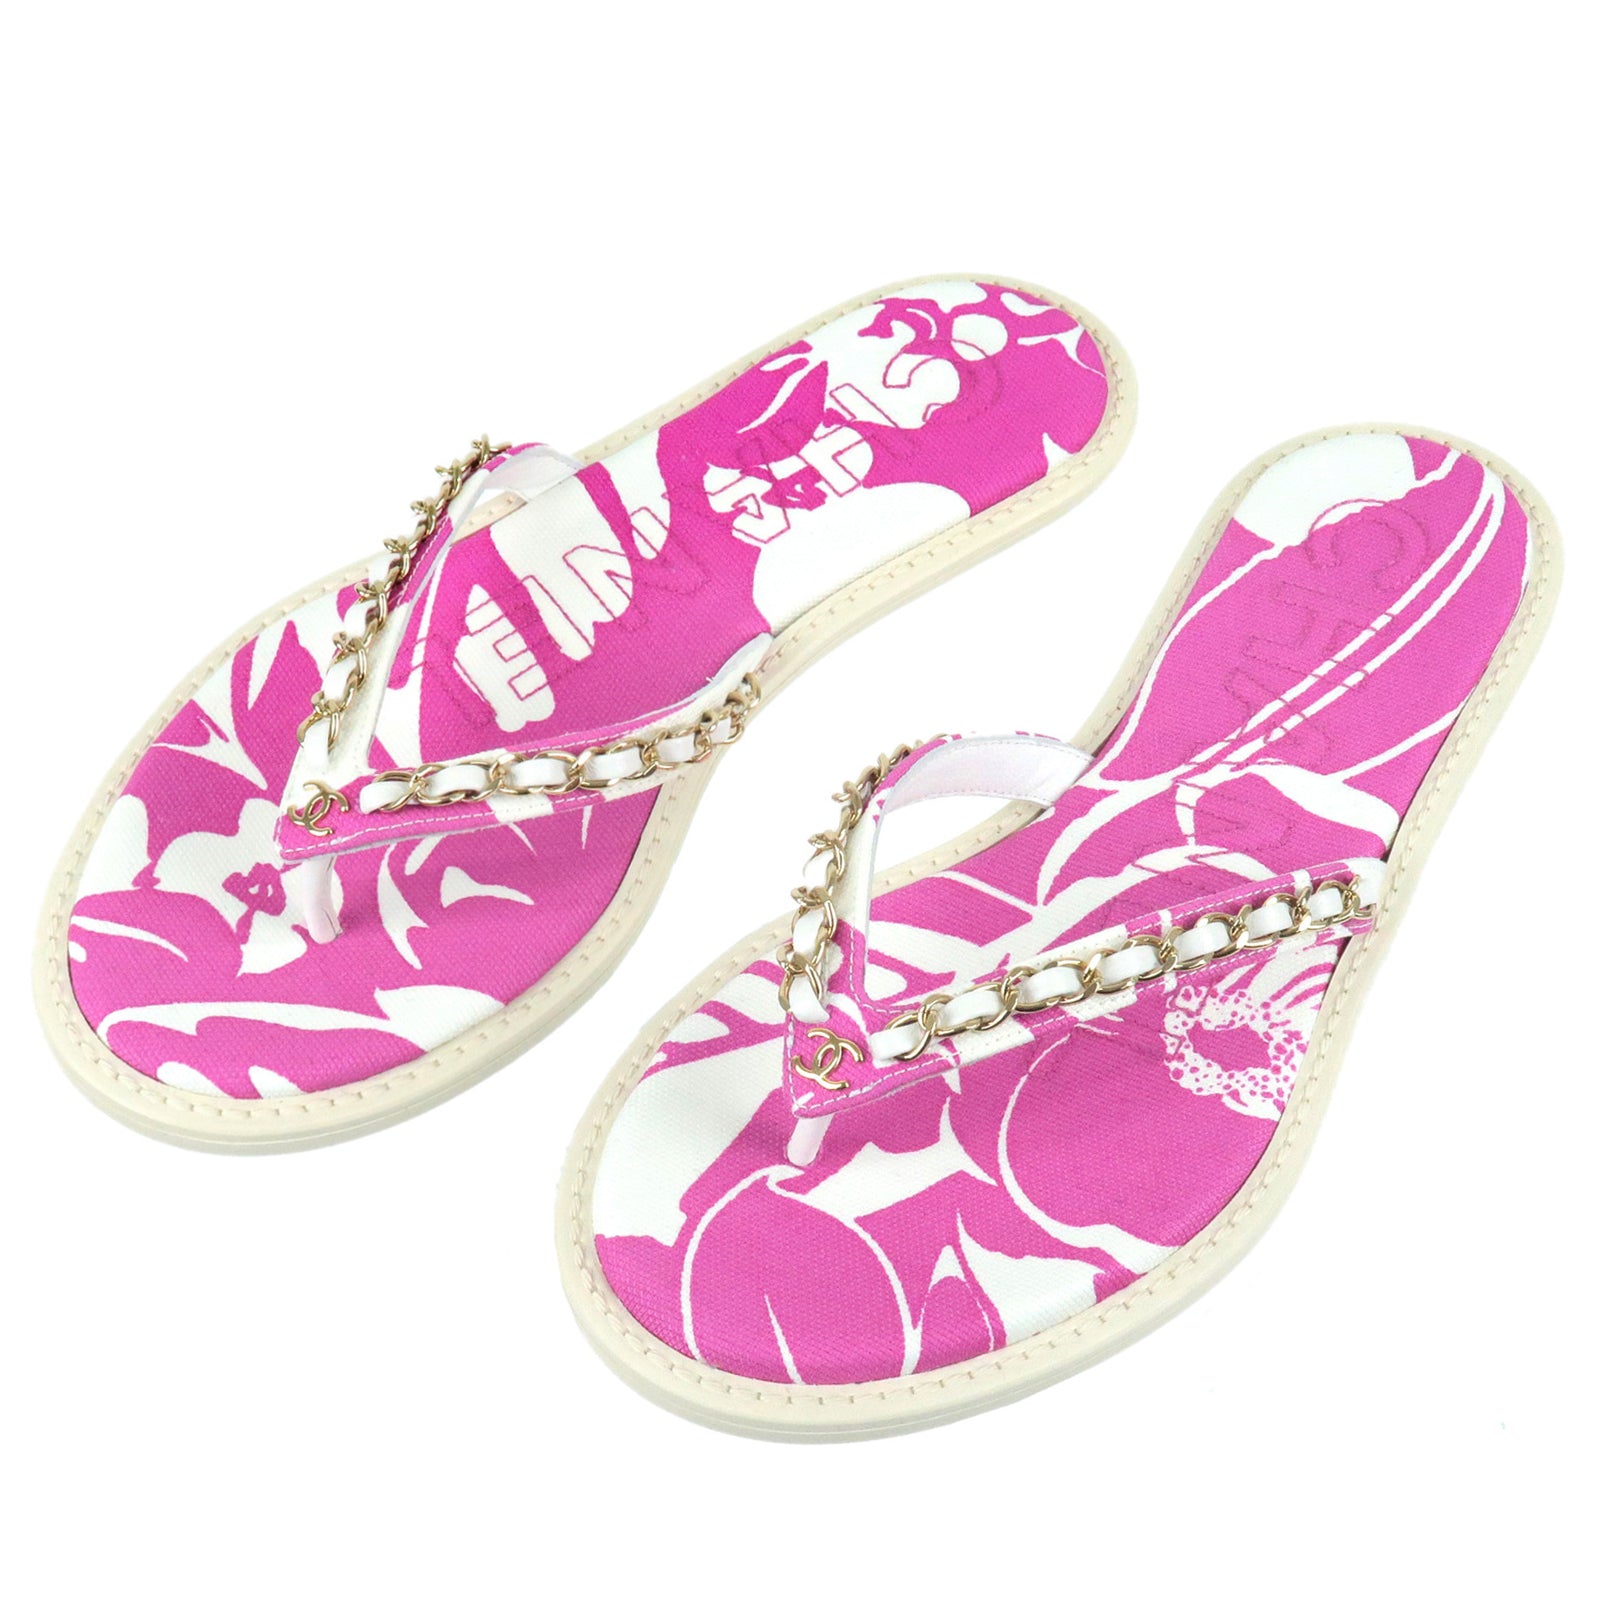 CHANEL-Coco-Beach-FlipFlop-Rubber-Canvas-Leather-Pink-White-G35965